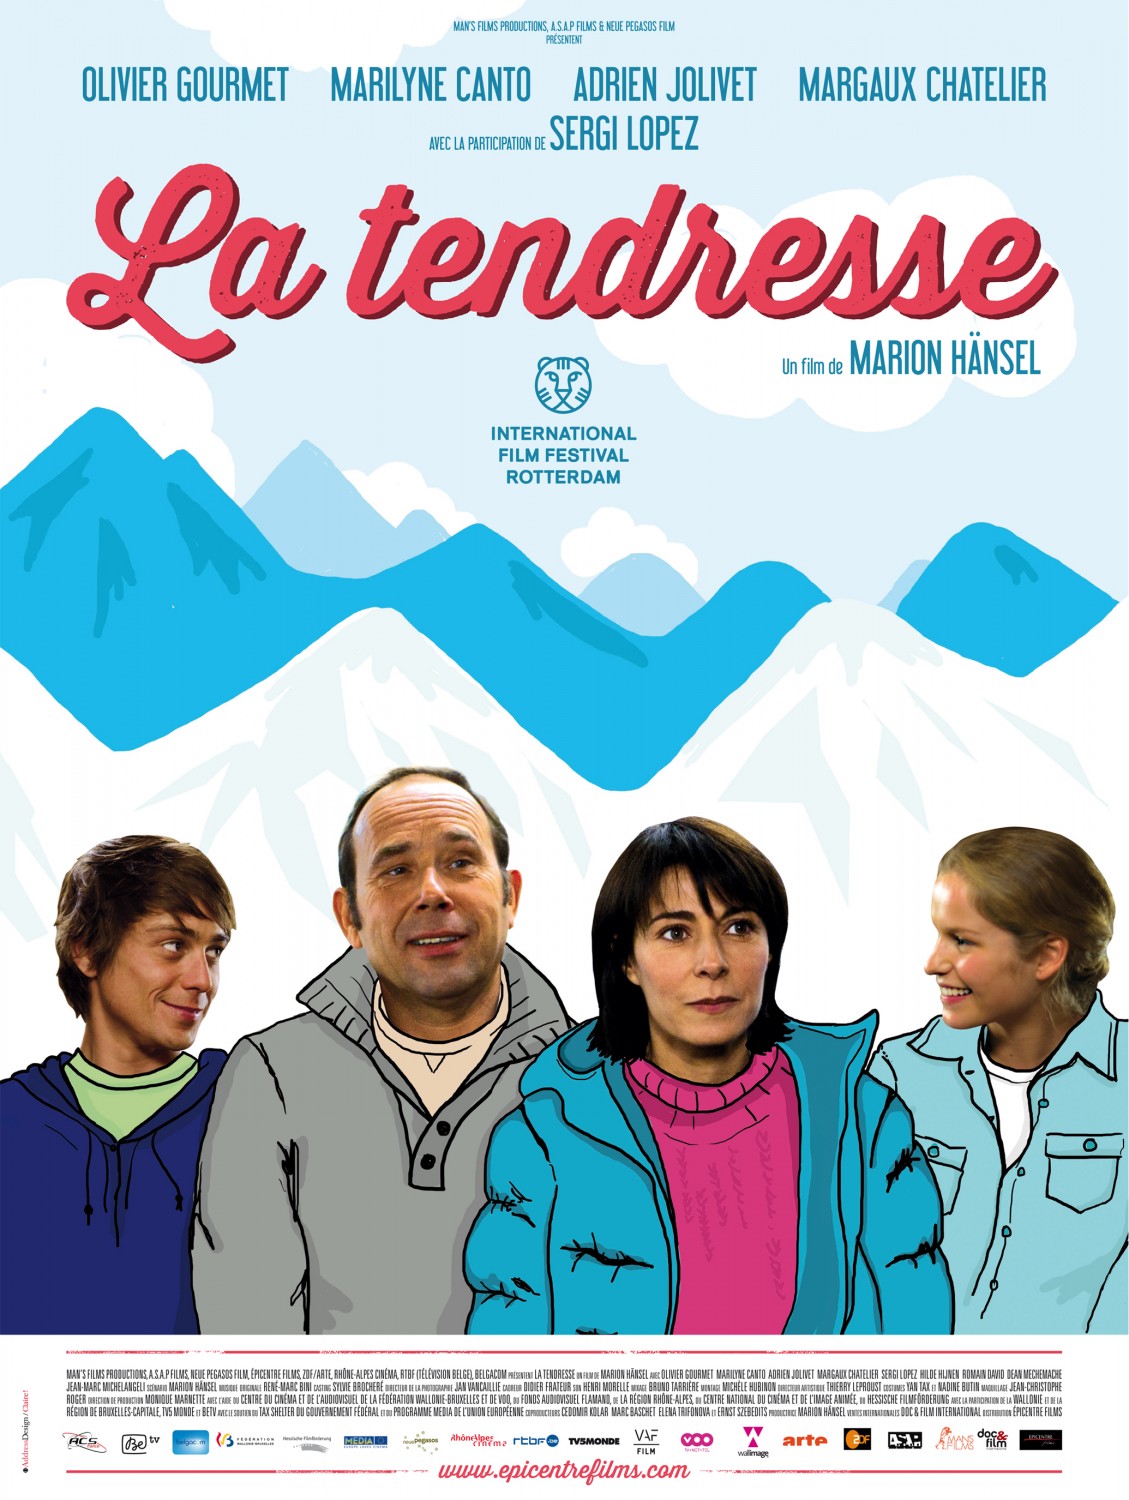 Extra Large Movie Poster Image for La tendresse 